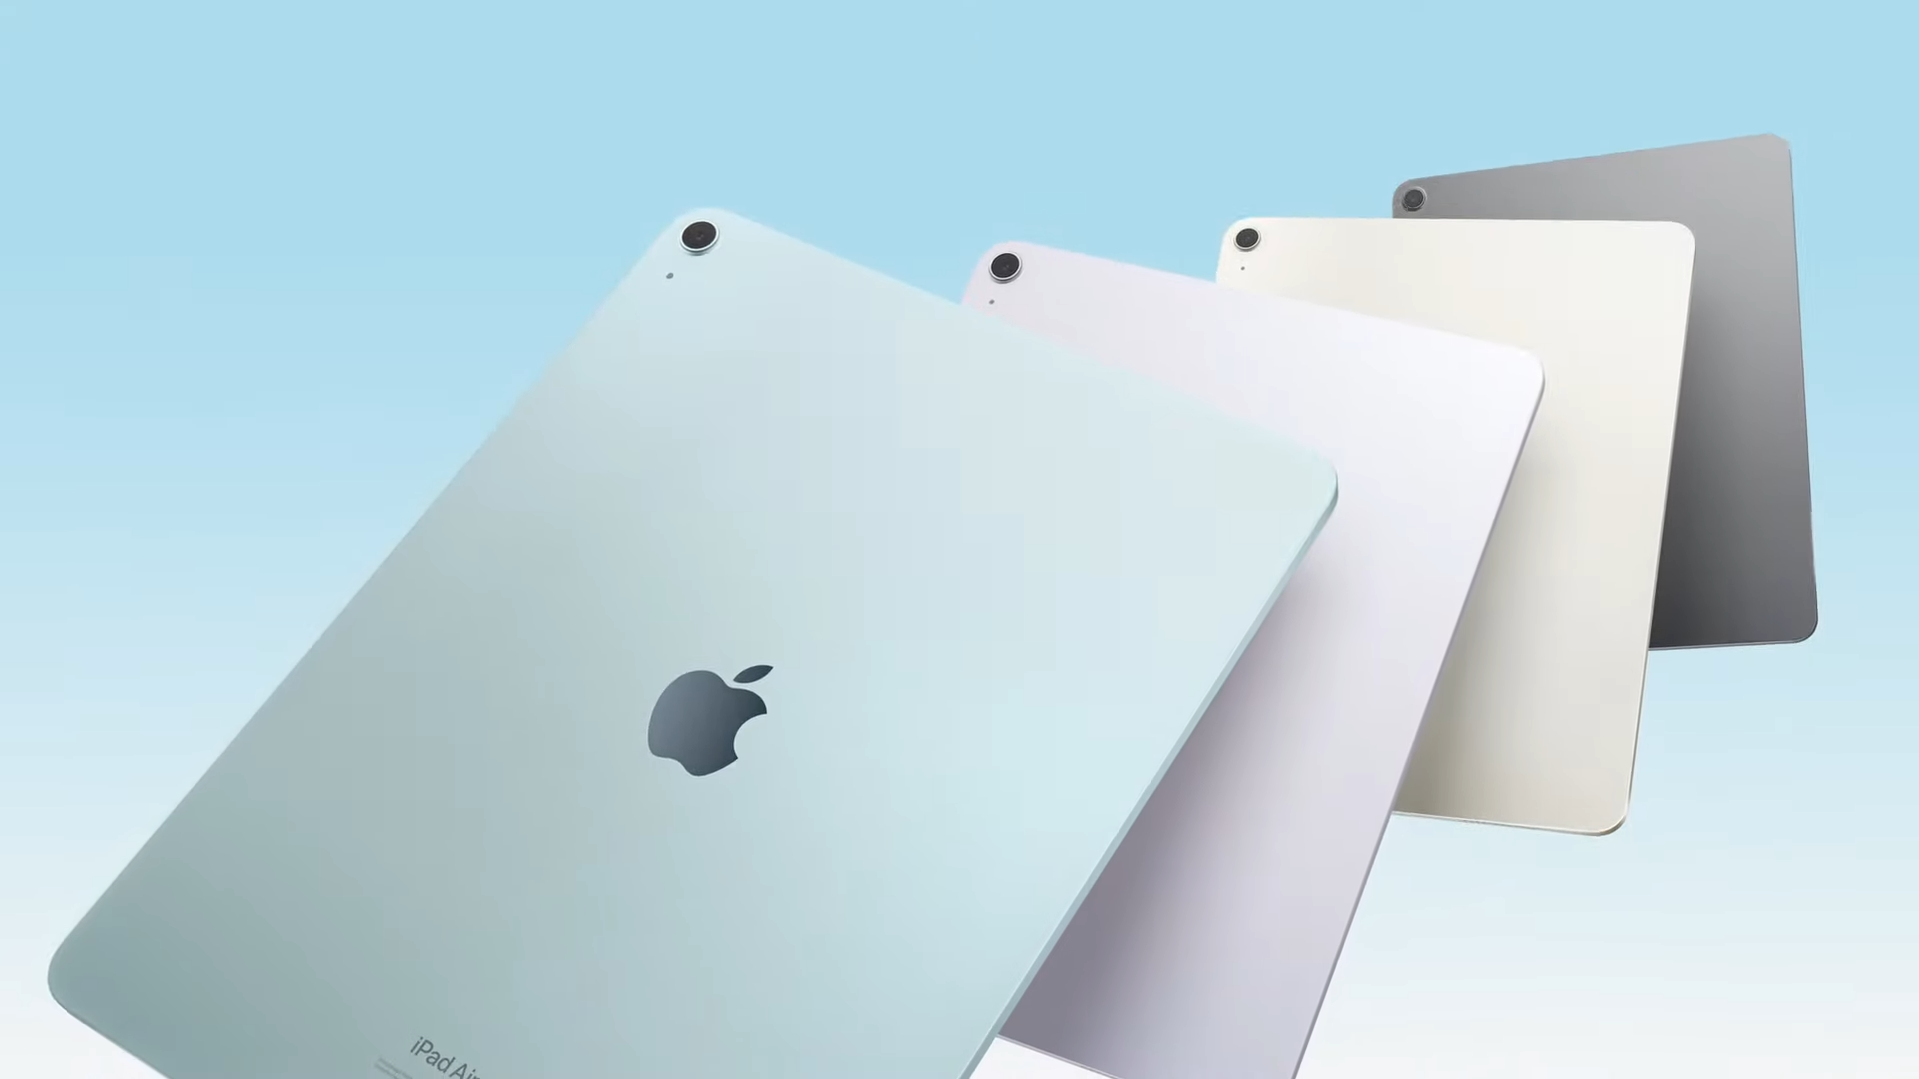 13inch iPad Air unveiled! Features and price